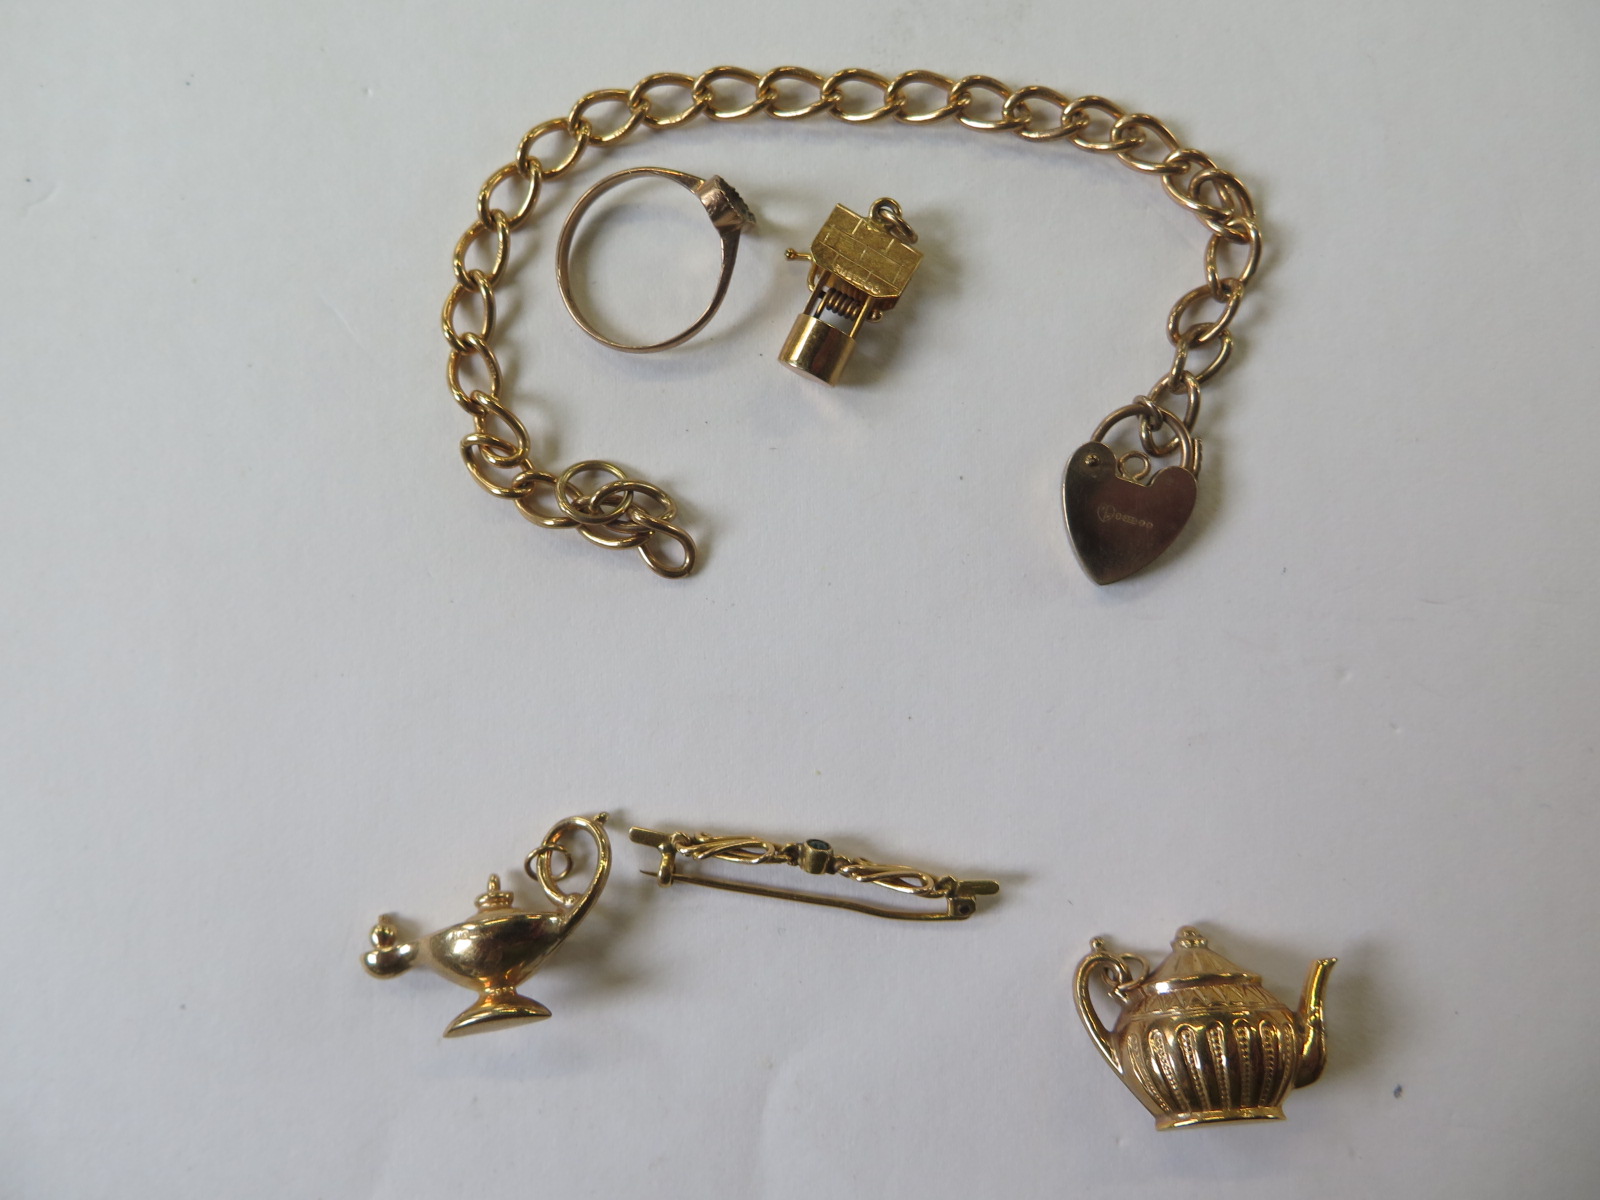 A 9ct hallmarked gold chain, 17cm long, a hallmarked 9ct gold charm, a 9ct gold ring missing its